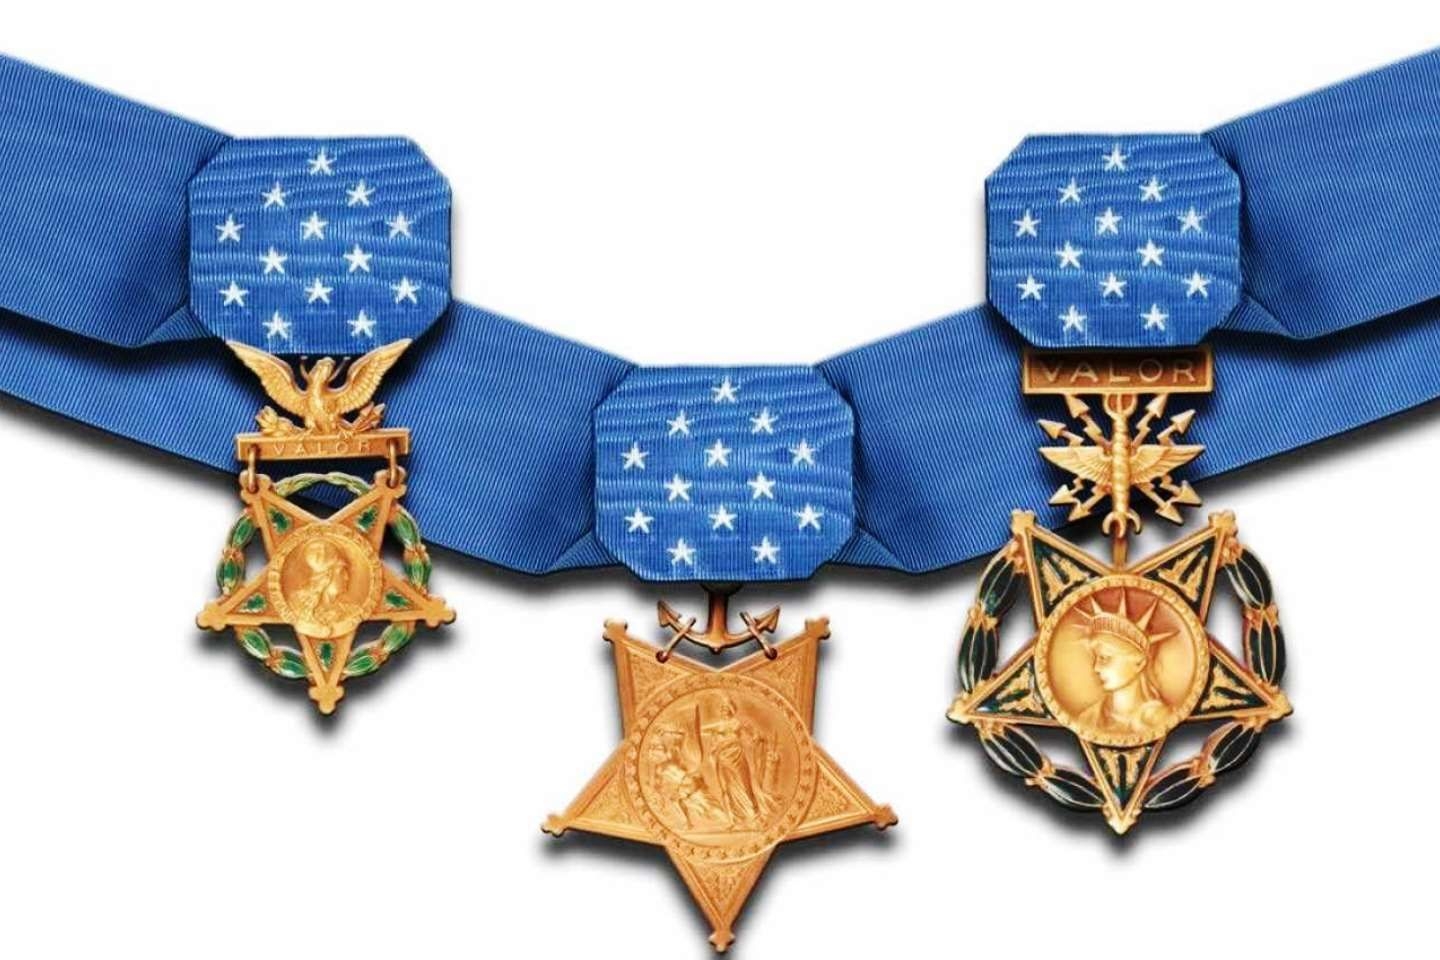 https://www.thereisadayforthat.com/holidays/usa/national-medal-of-honor-day